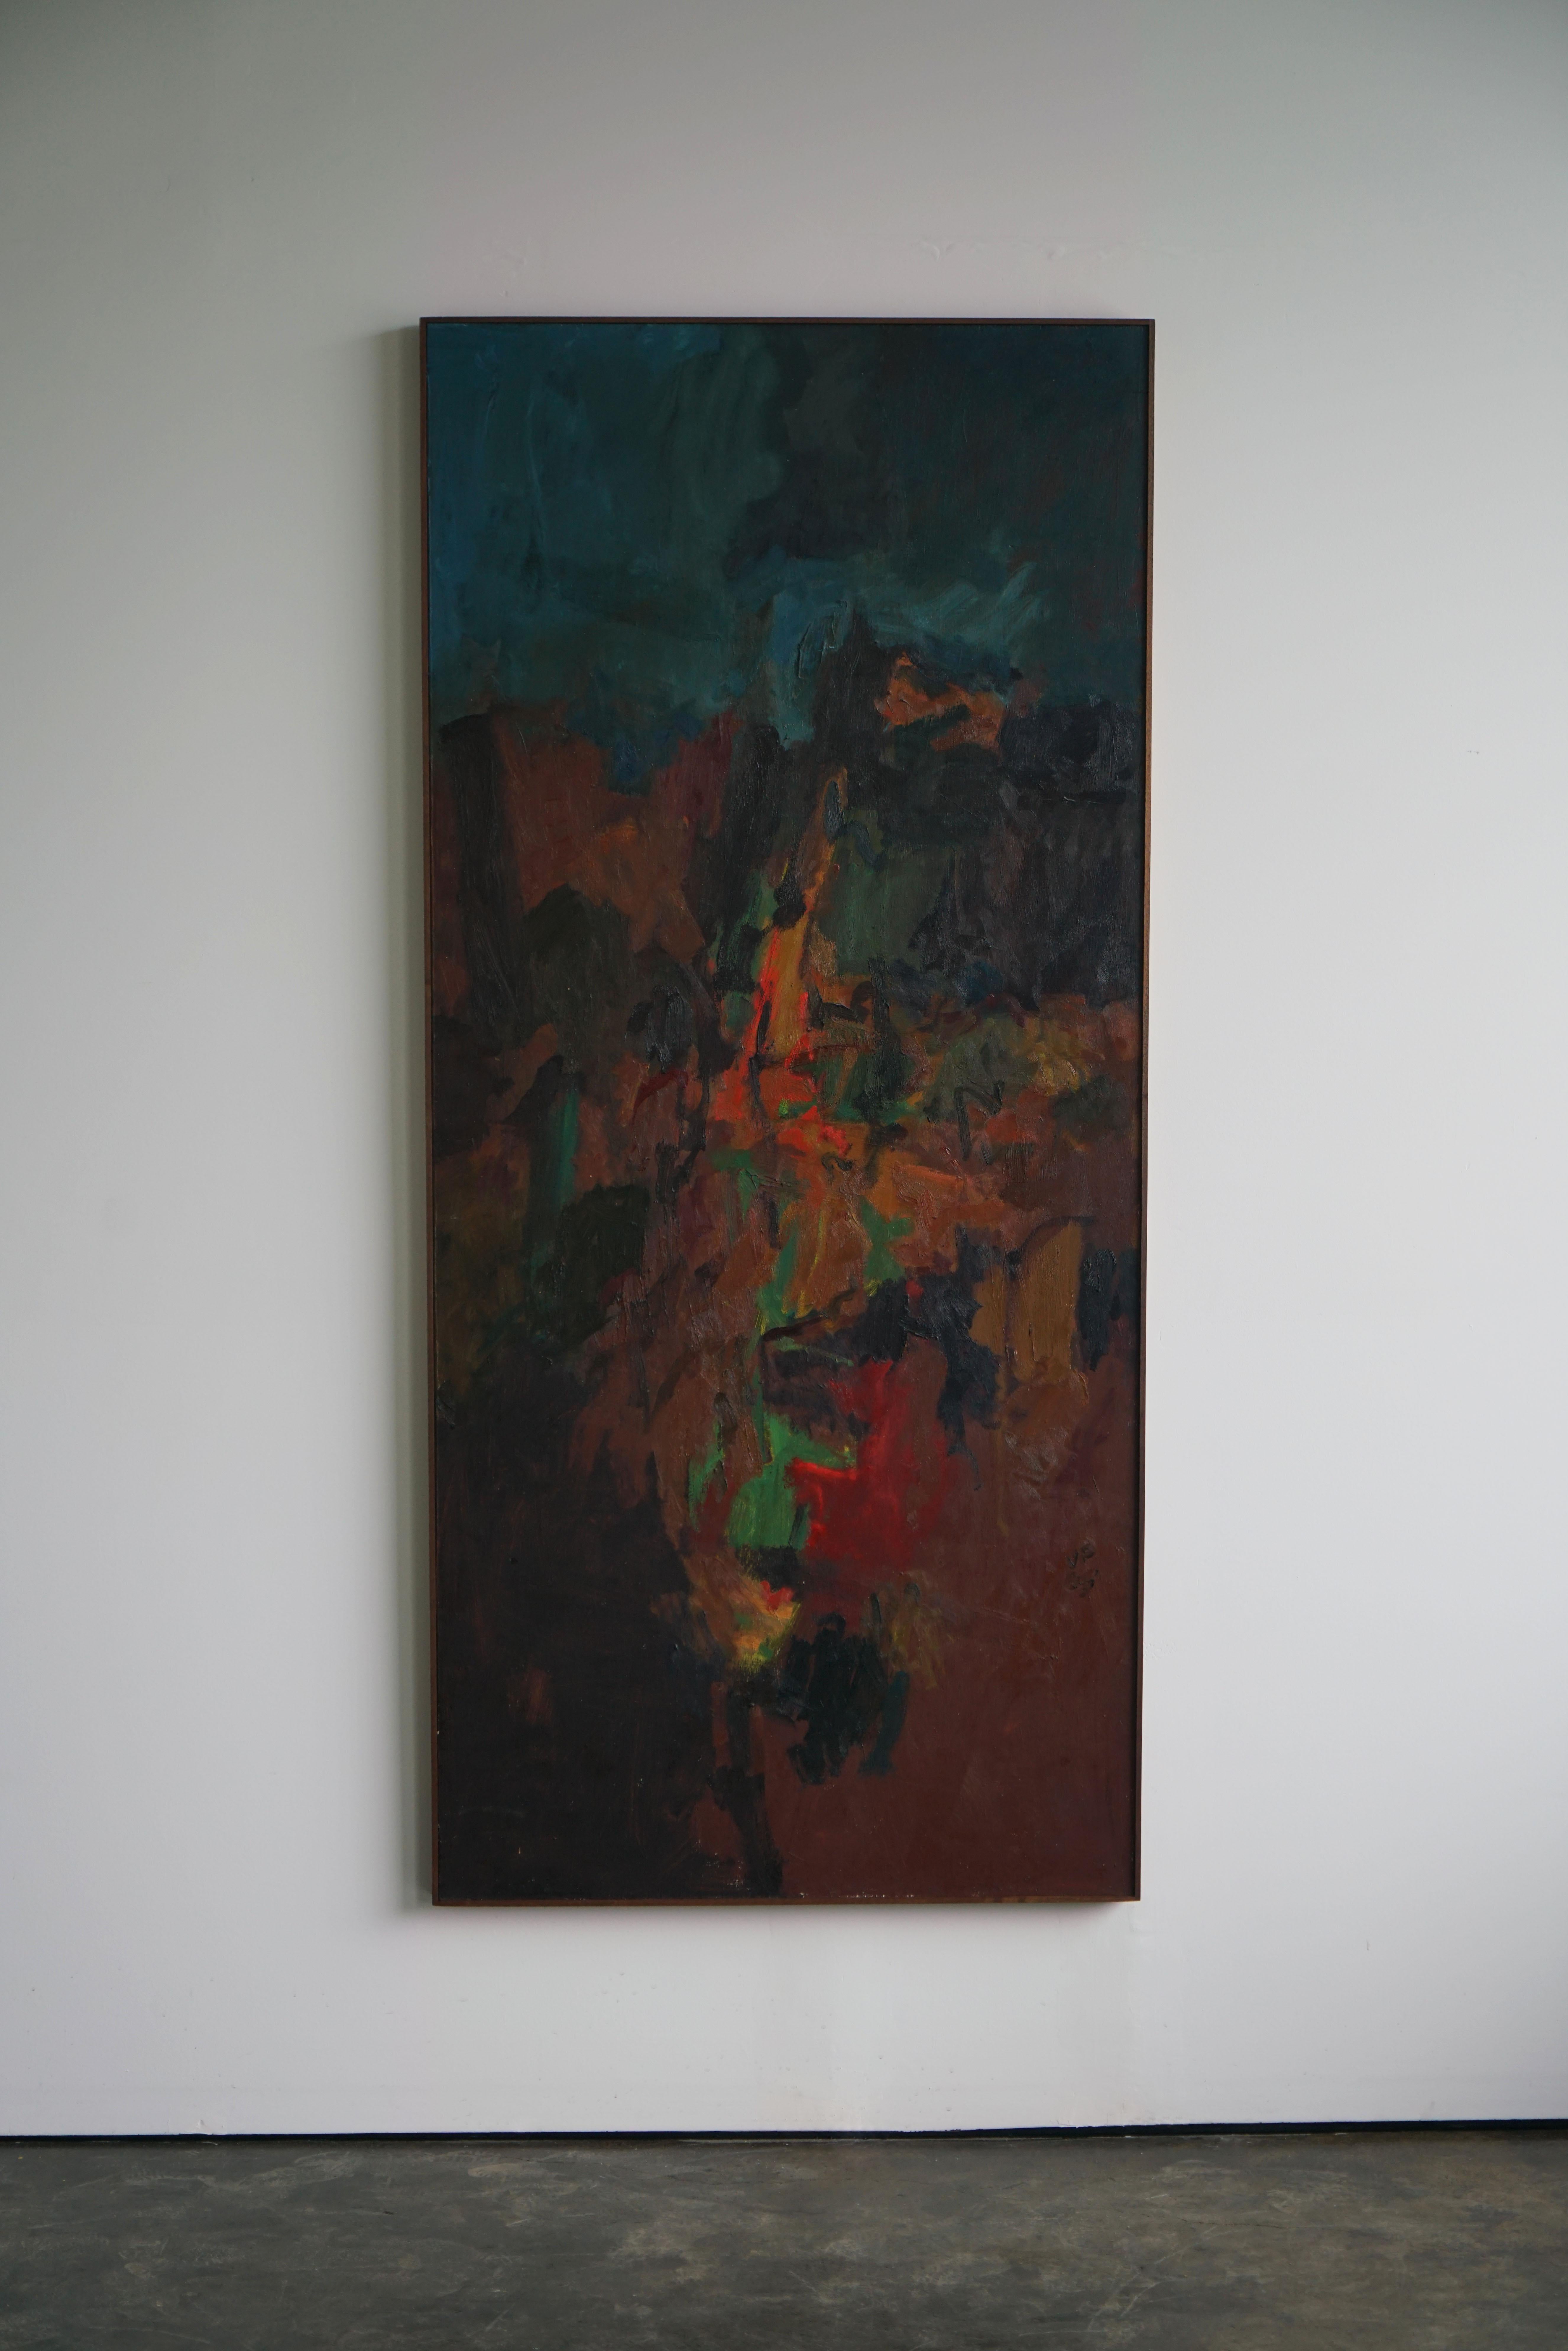 Abstract painting by Jerry Pinsler, 1965

(American, 1928-1996)

Oil on a found door. New walnut frame. Signed and dated.

Absolutely stunning in real life.

80” x 36”.

New walnut hardwood frame that is the same size as Artist's original